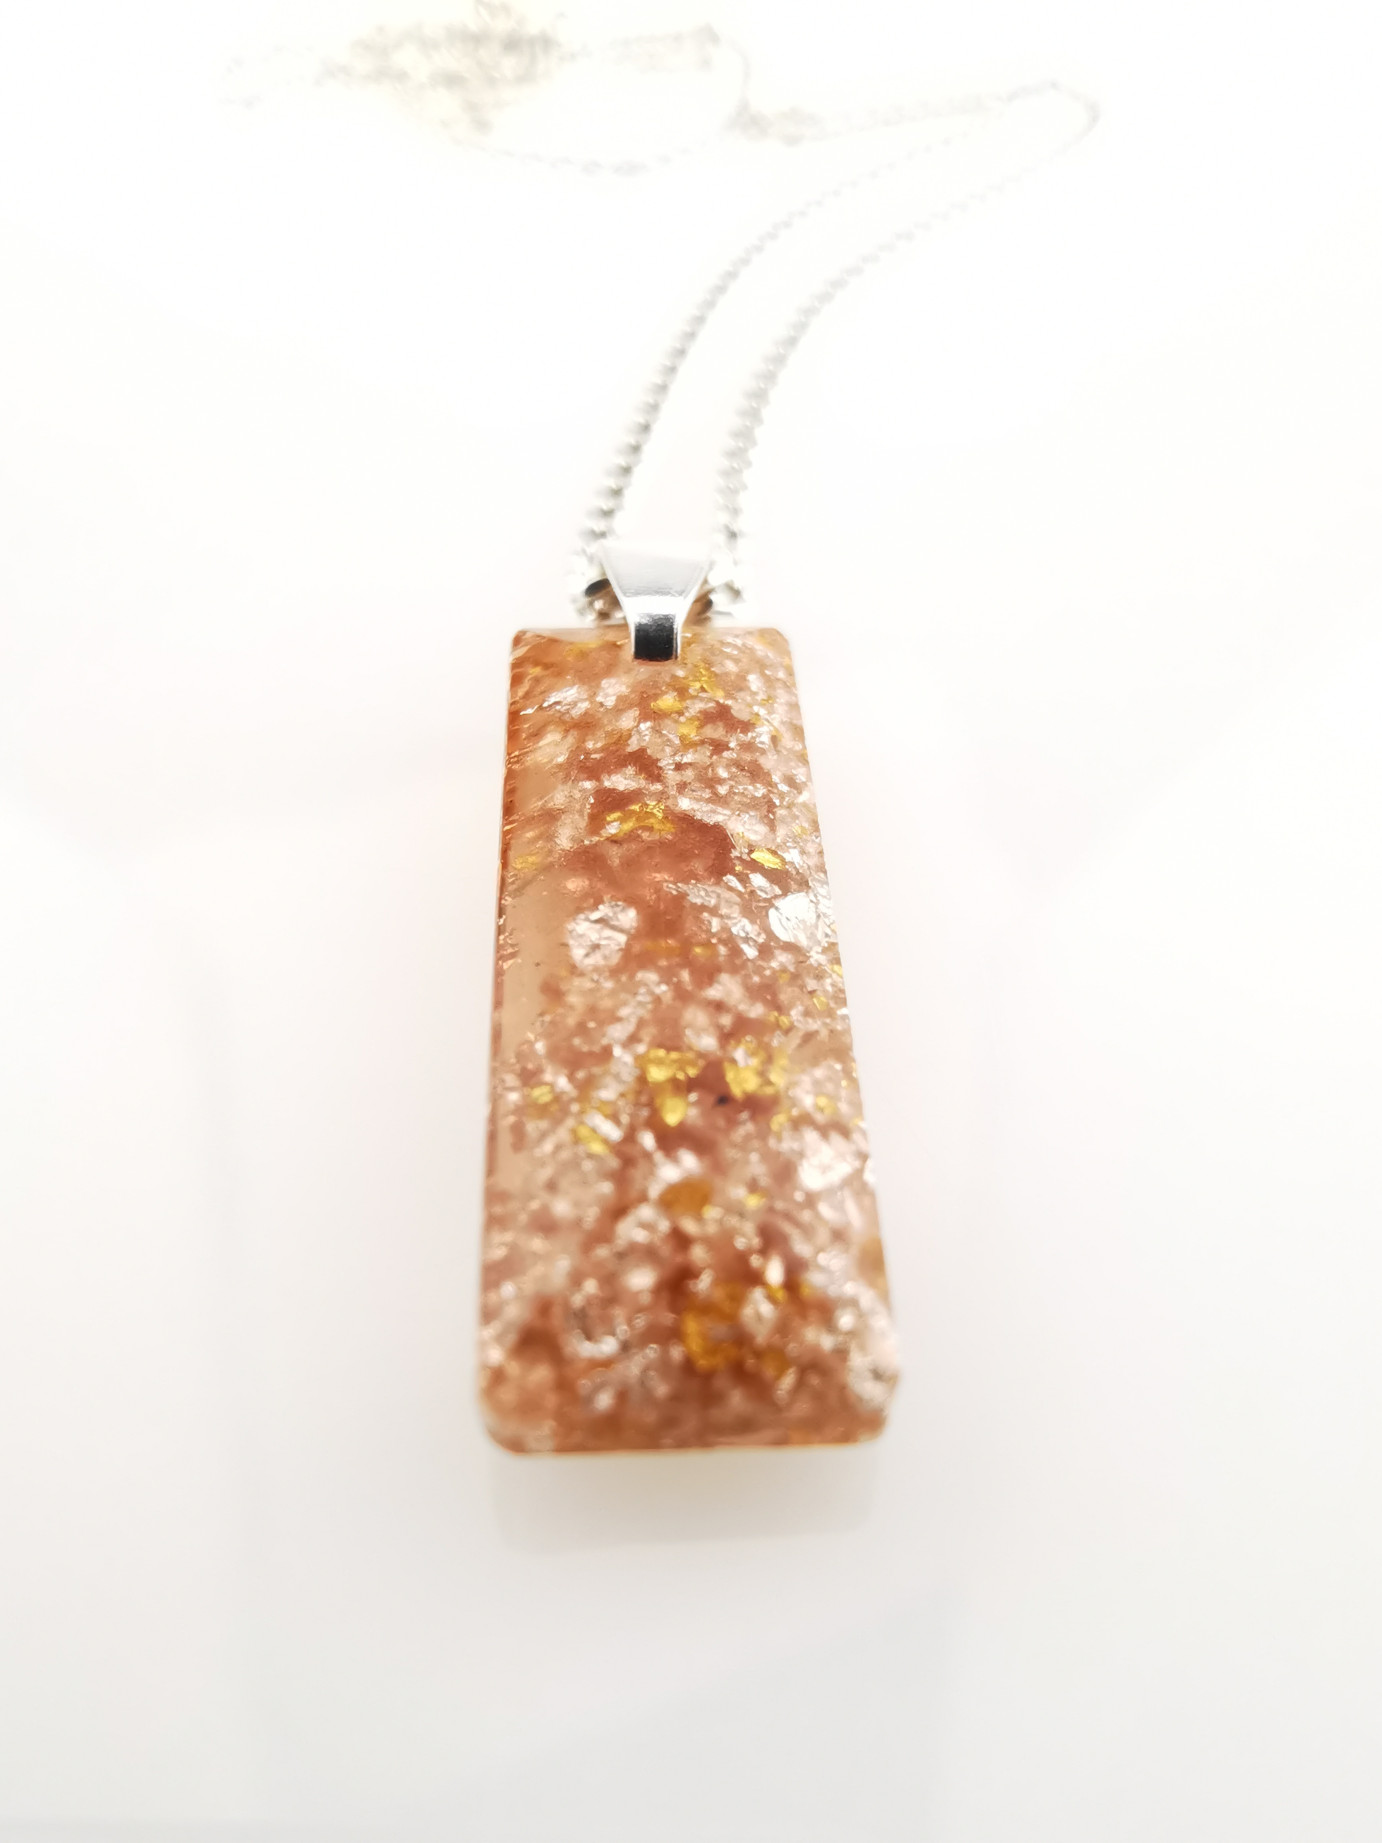 Amber Baguette Orgonite Jewelry Necklace by OrgoneVibes